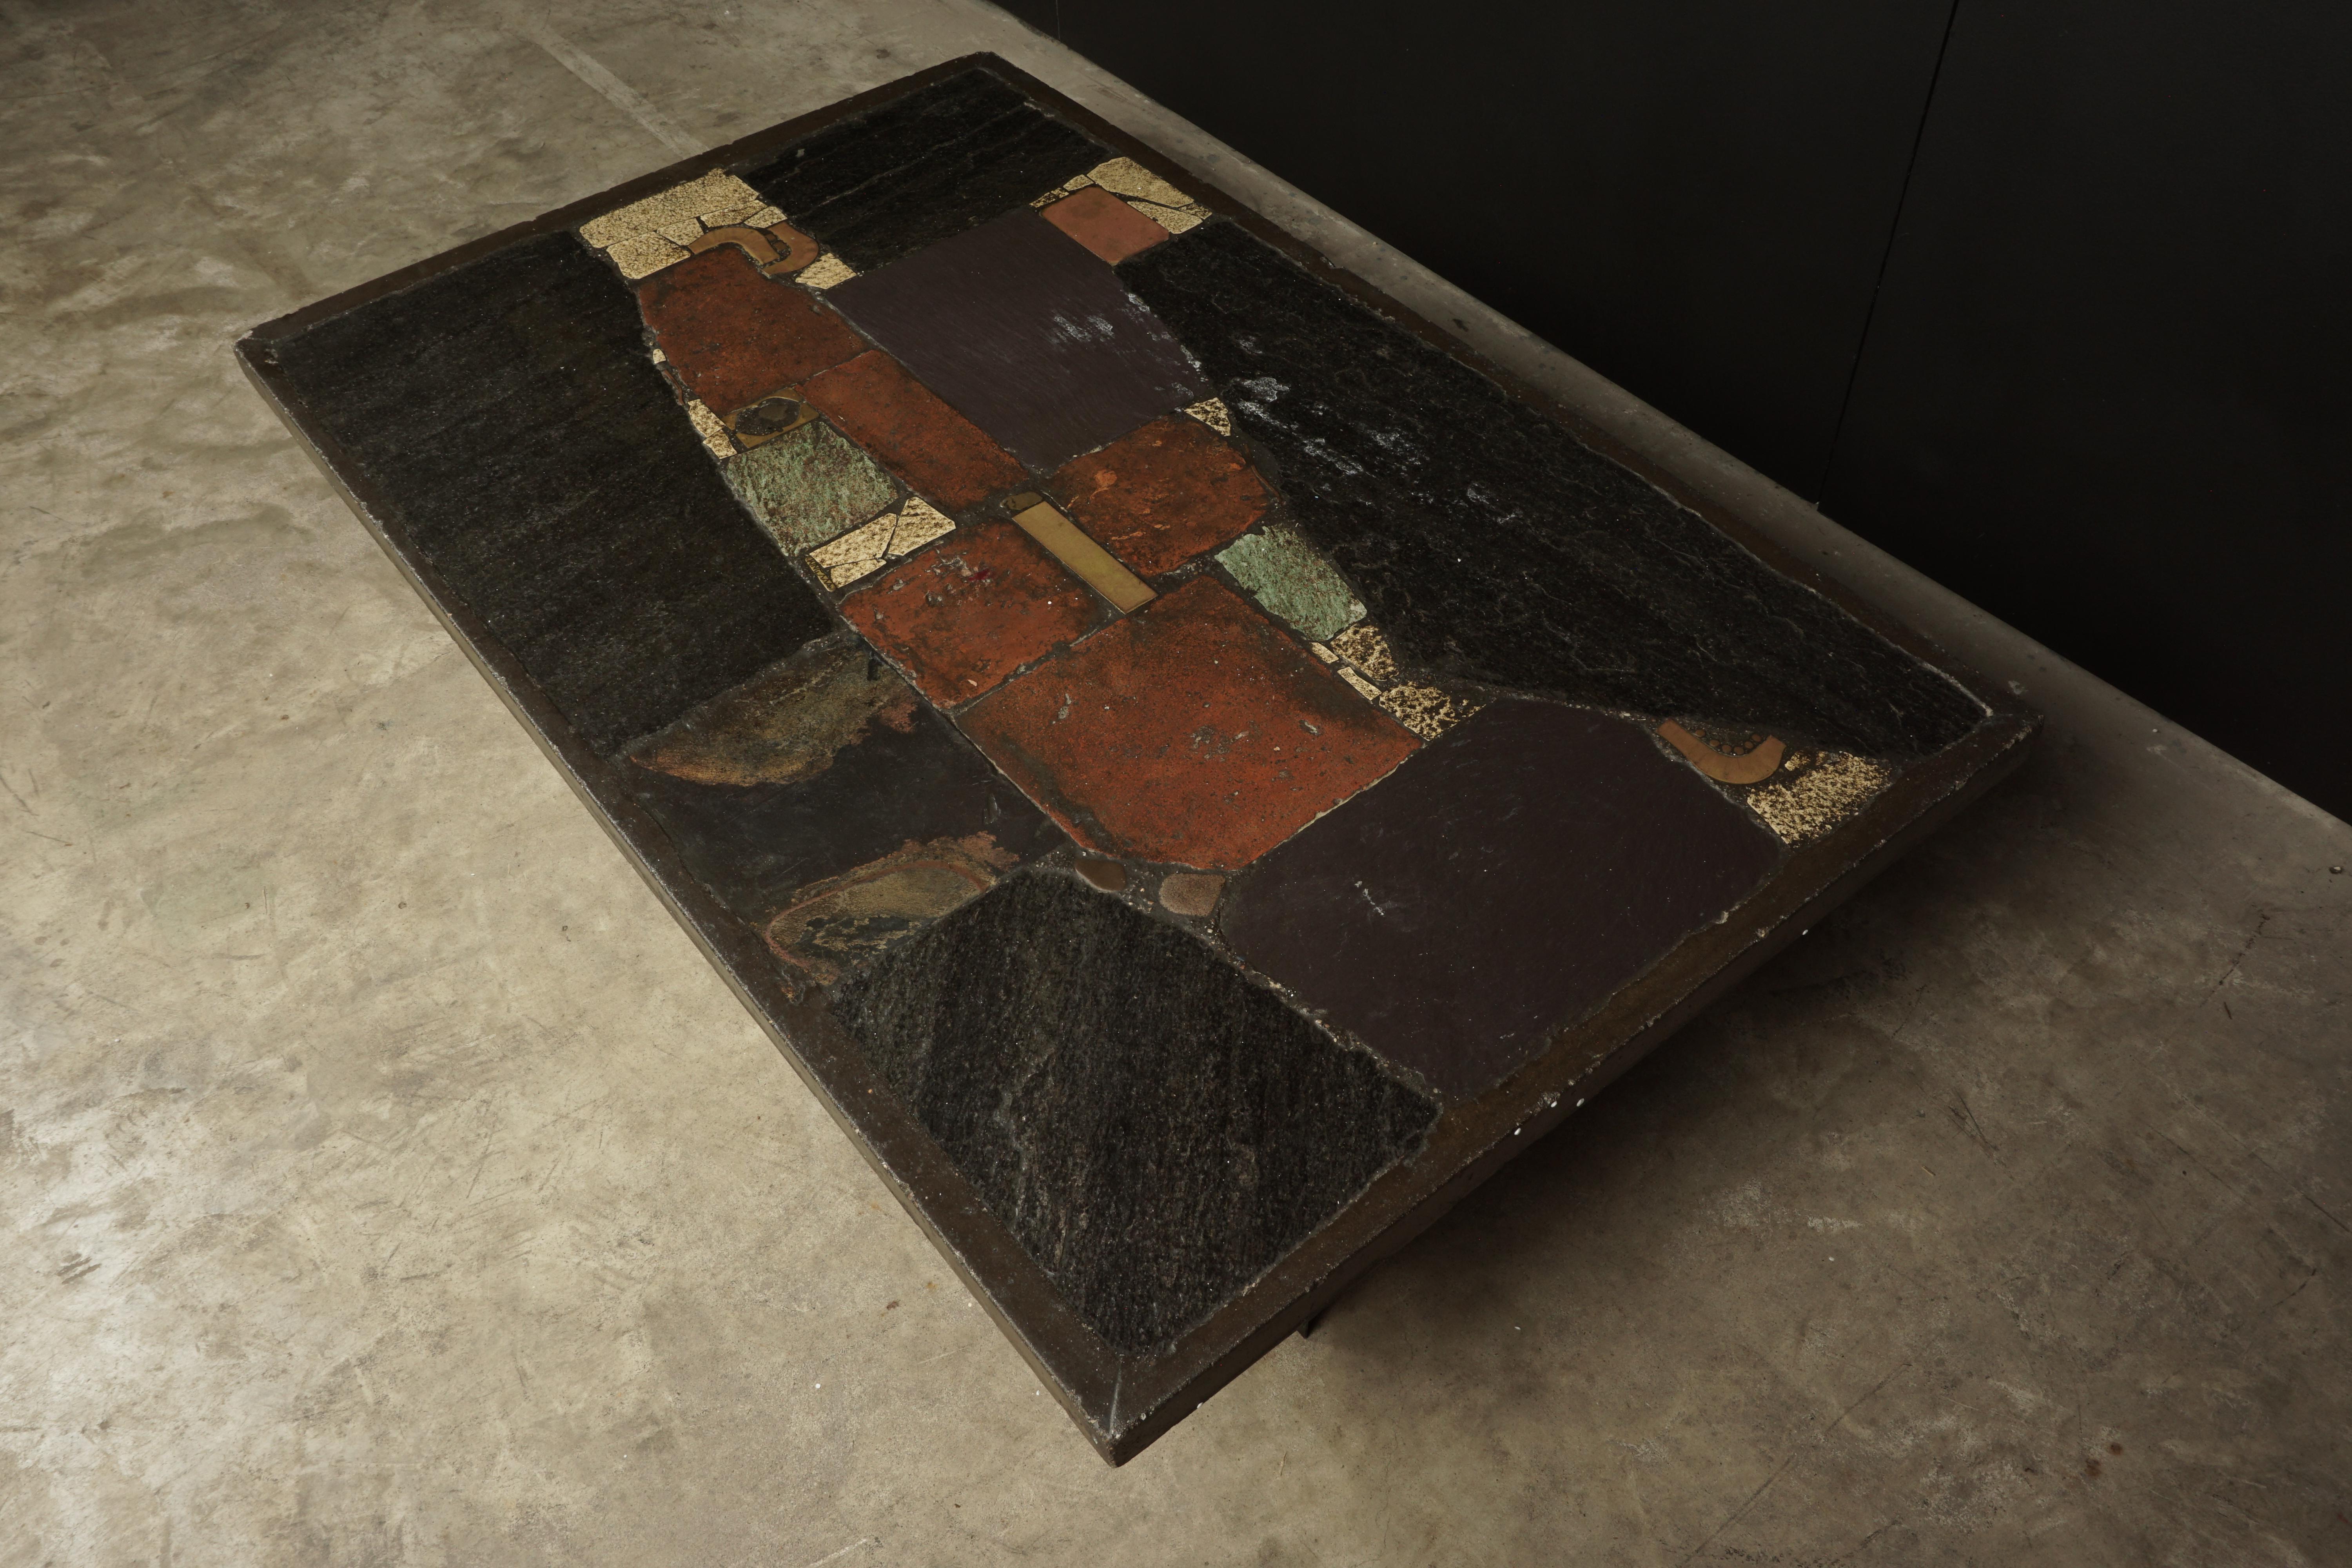 Brutalist Paul Kingma coffee table from Holland, 1960s. Concrete top inlaid with mosaic slate and stone. Black metal lacquered feet. Singed Kingma on the top.